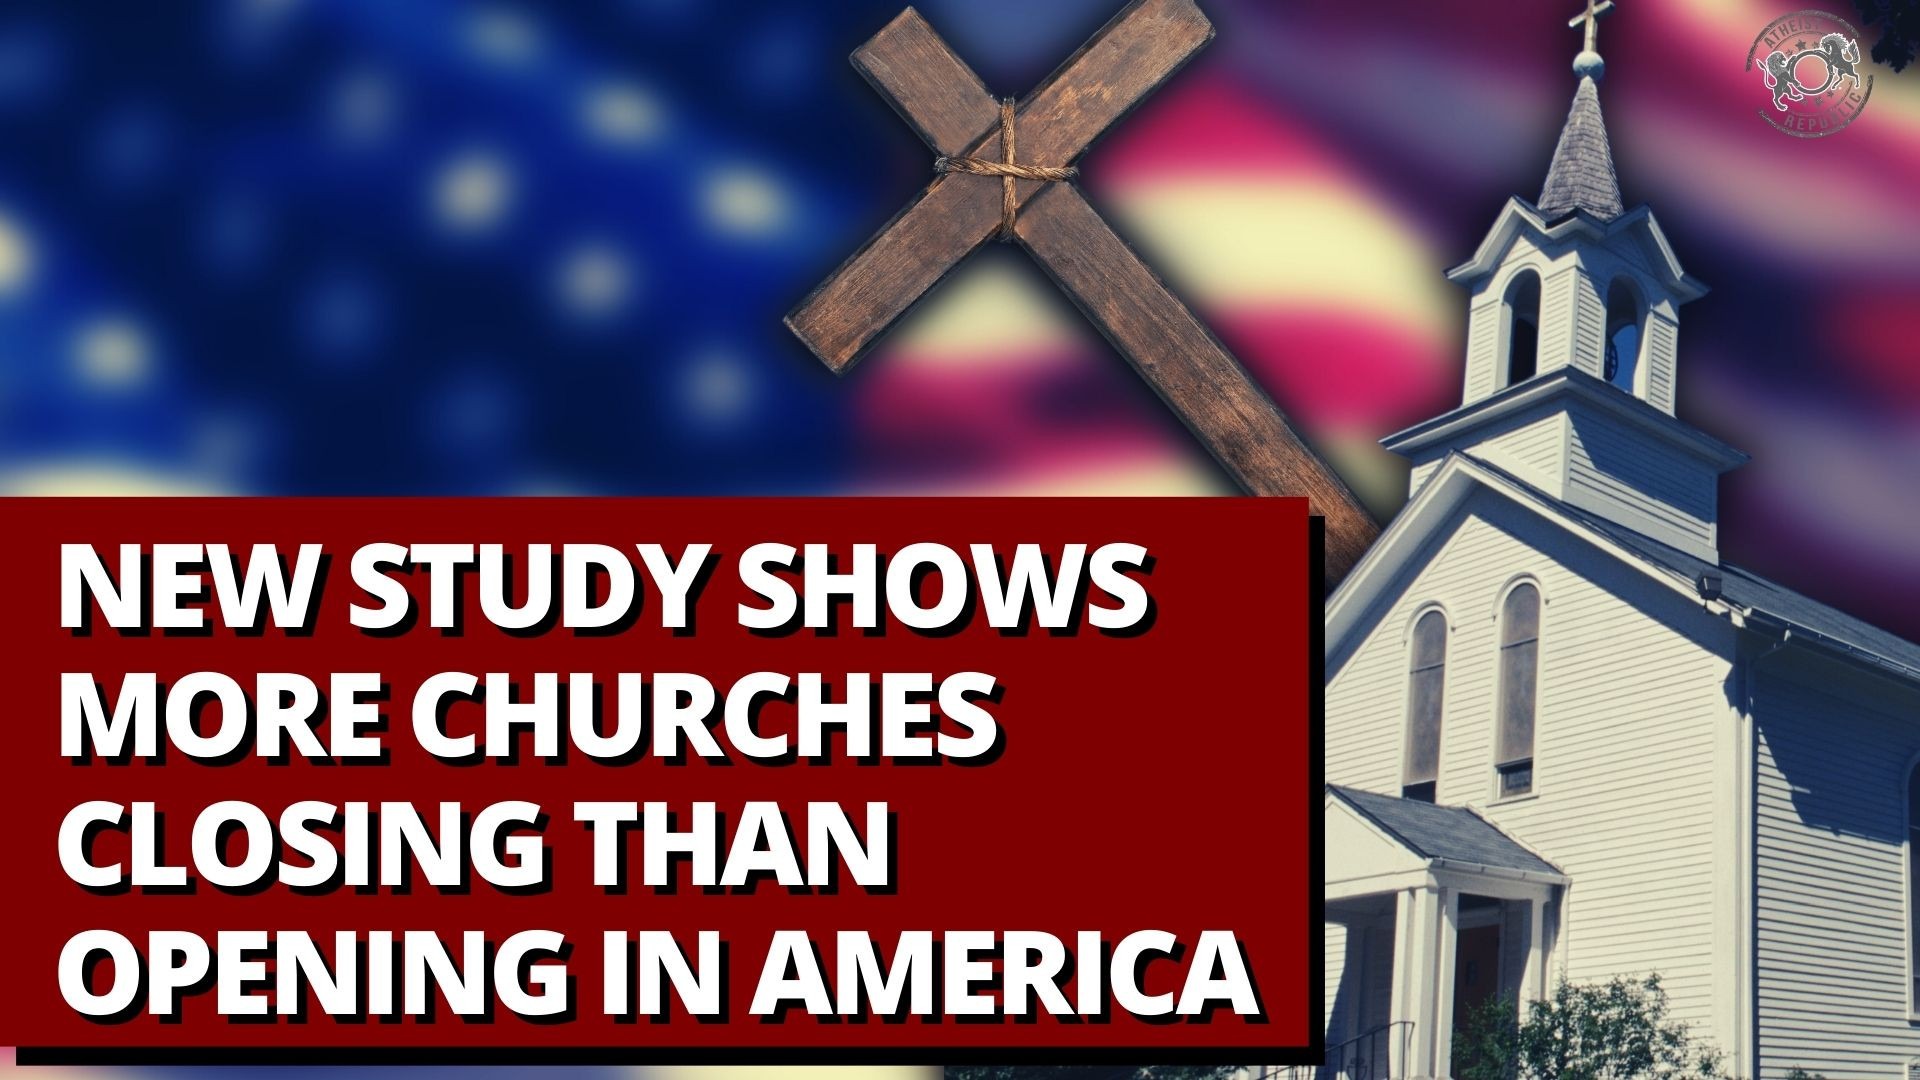 New Study Shows More Churches Closing Than Opening in America